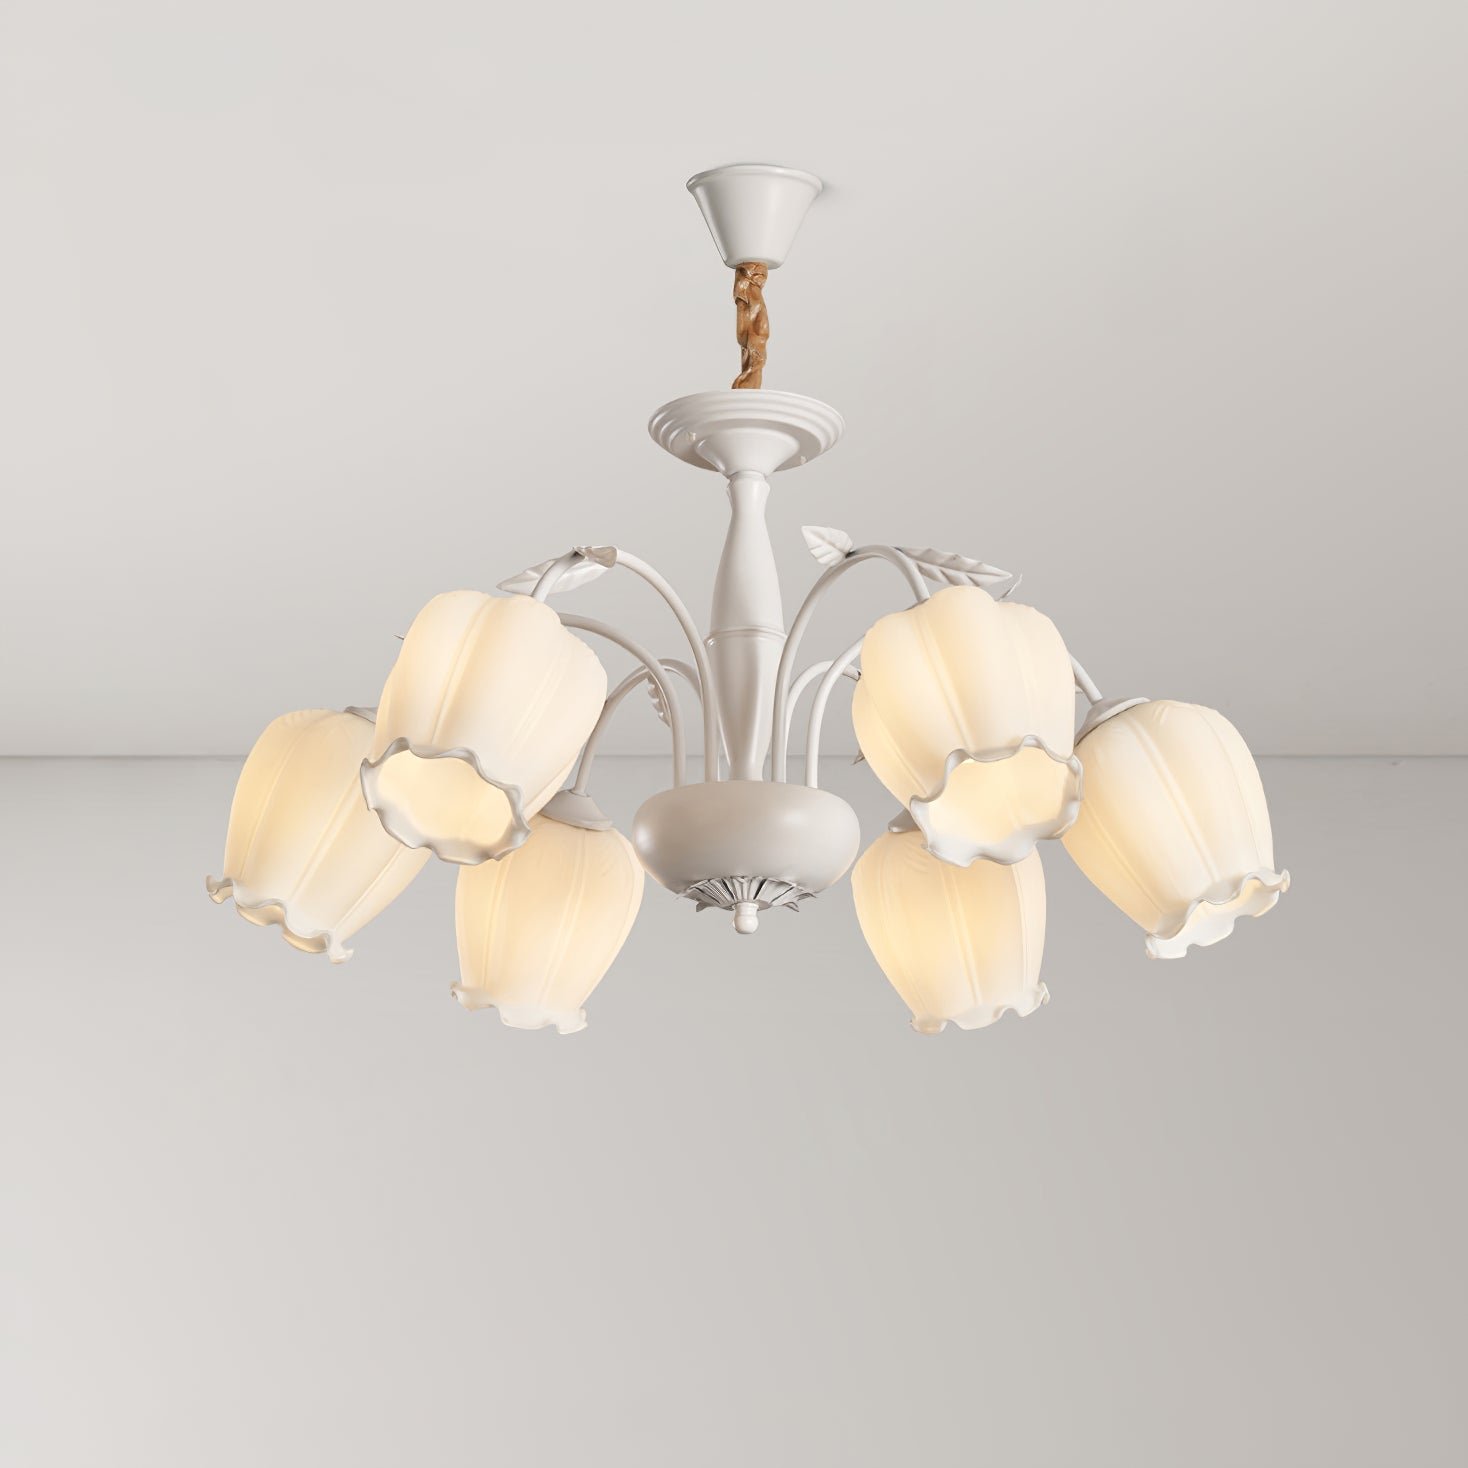 Rococo Style Chandelier in White with 6 Heads, 29.5-inch Diameter and 15.7-inch Height (75cm x 40cm)